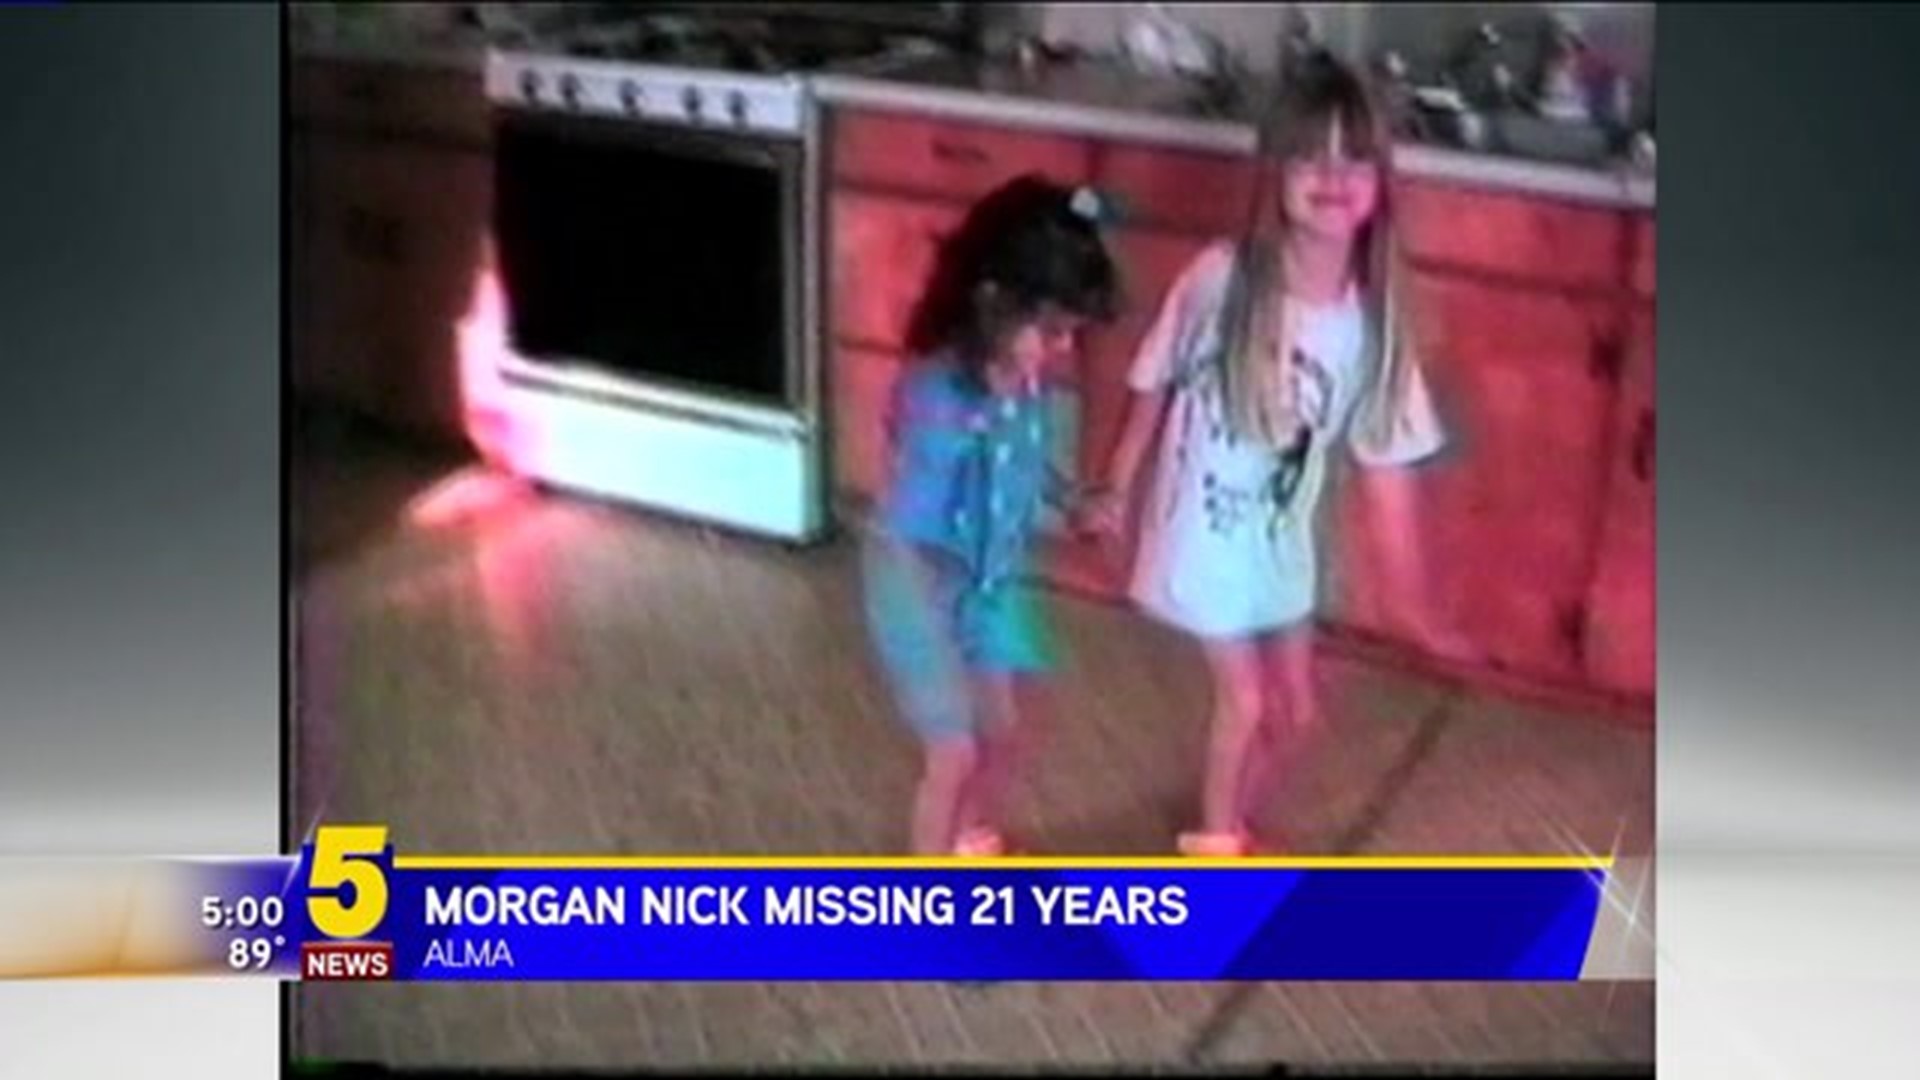 Morgan Nick Foundation - Sadly Tyler has been located deceased